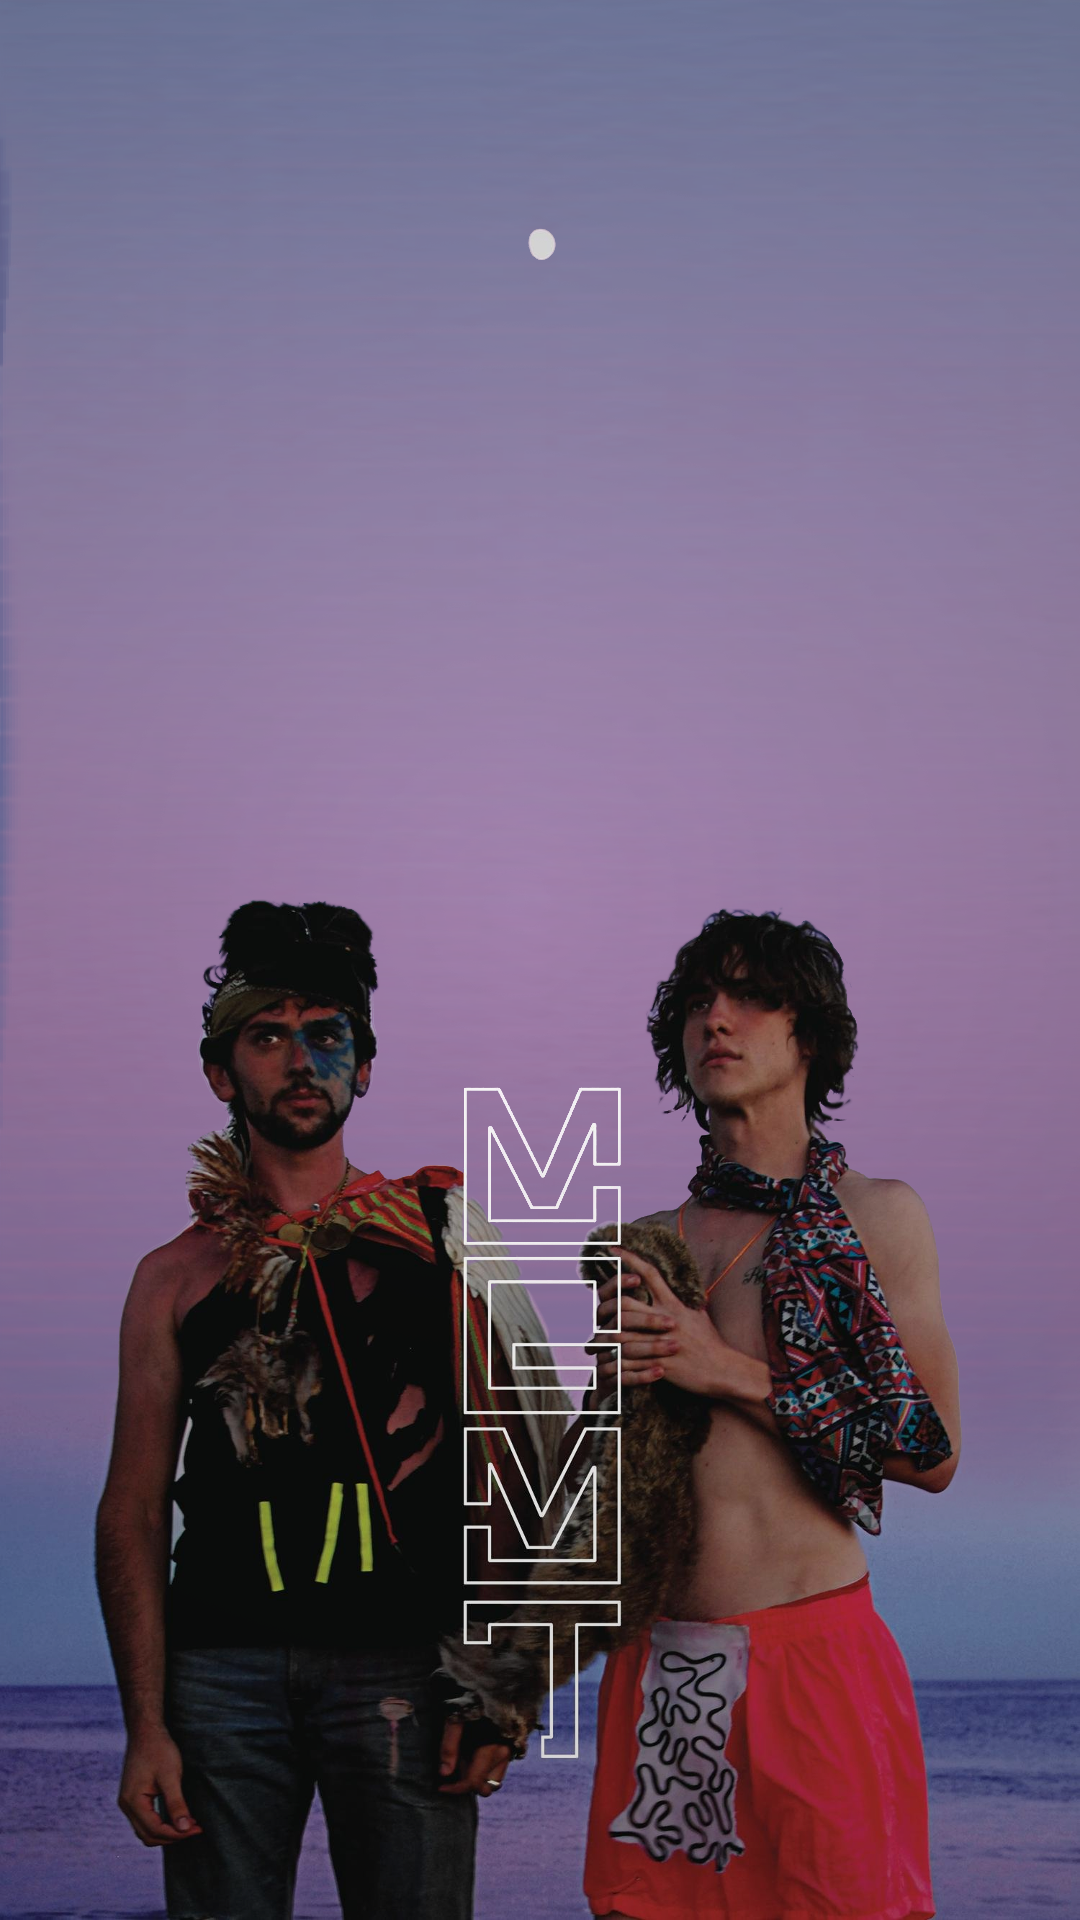 Another Simple Album Art Phone Wallpaper Mgmt